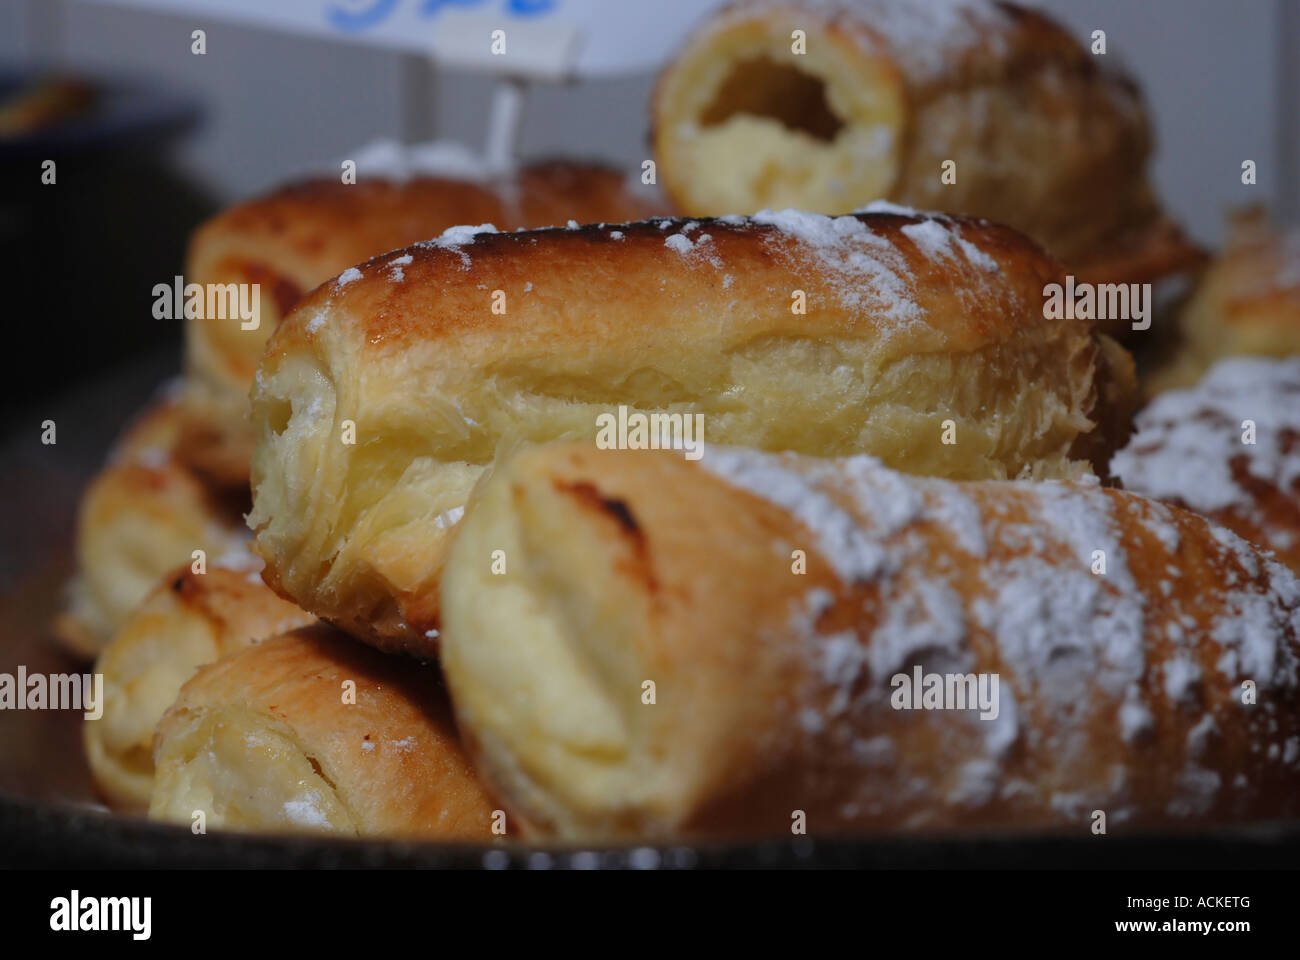 Sweet cheese pastry Stock Photo